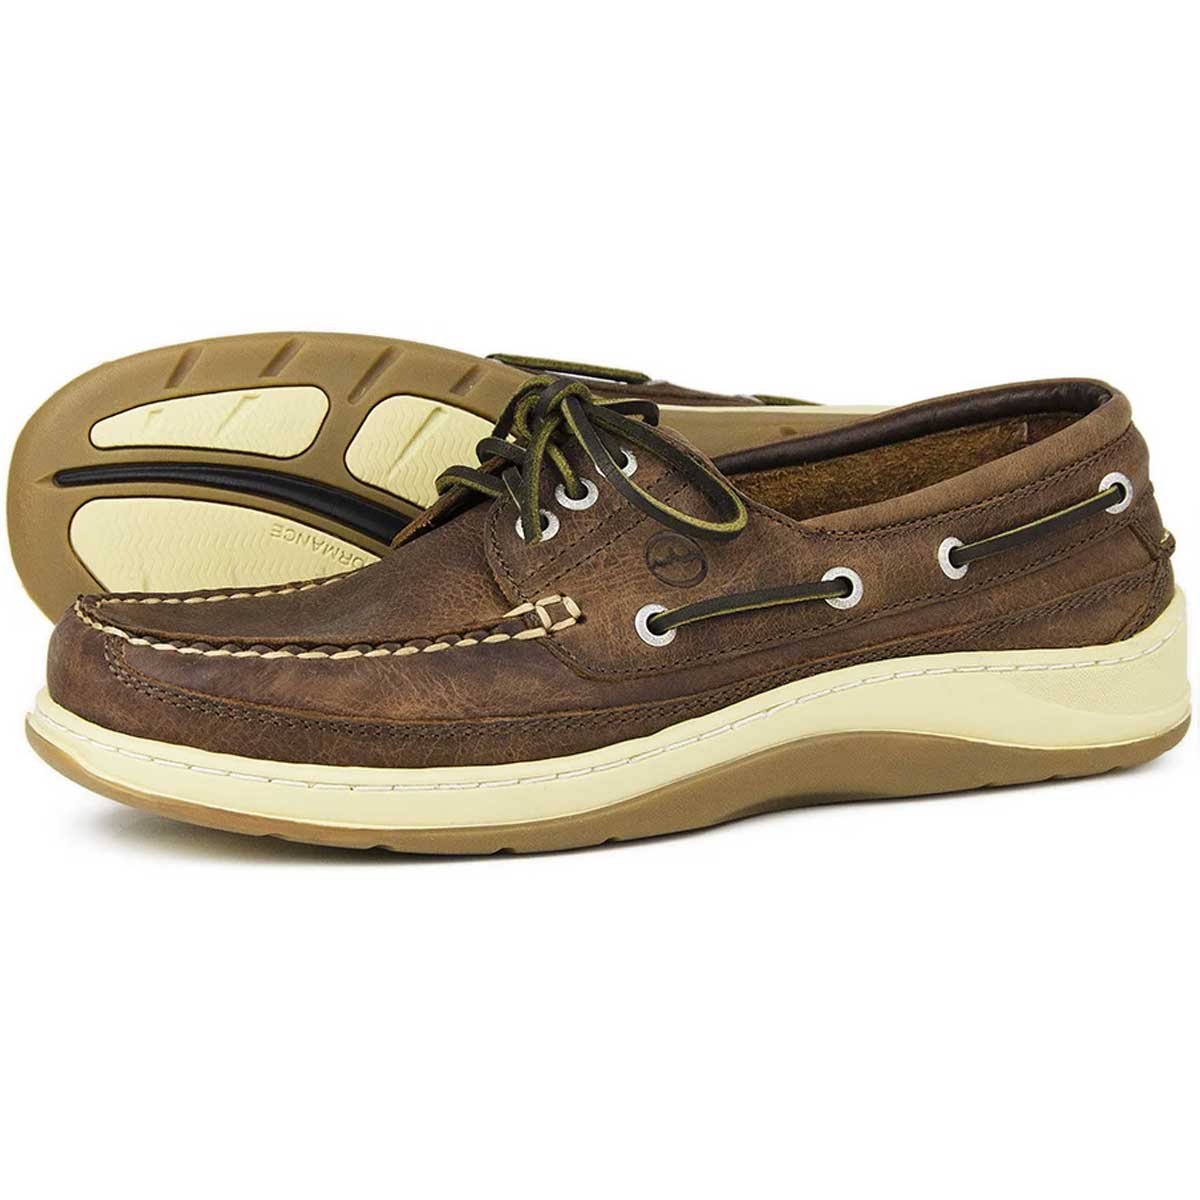 ORCA BAY Mens Squamish Performance Deck Shoes - Russet